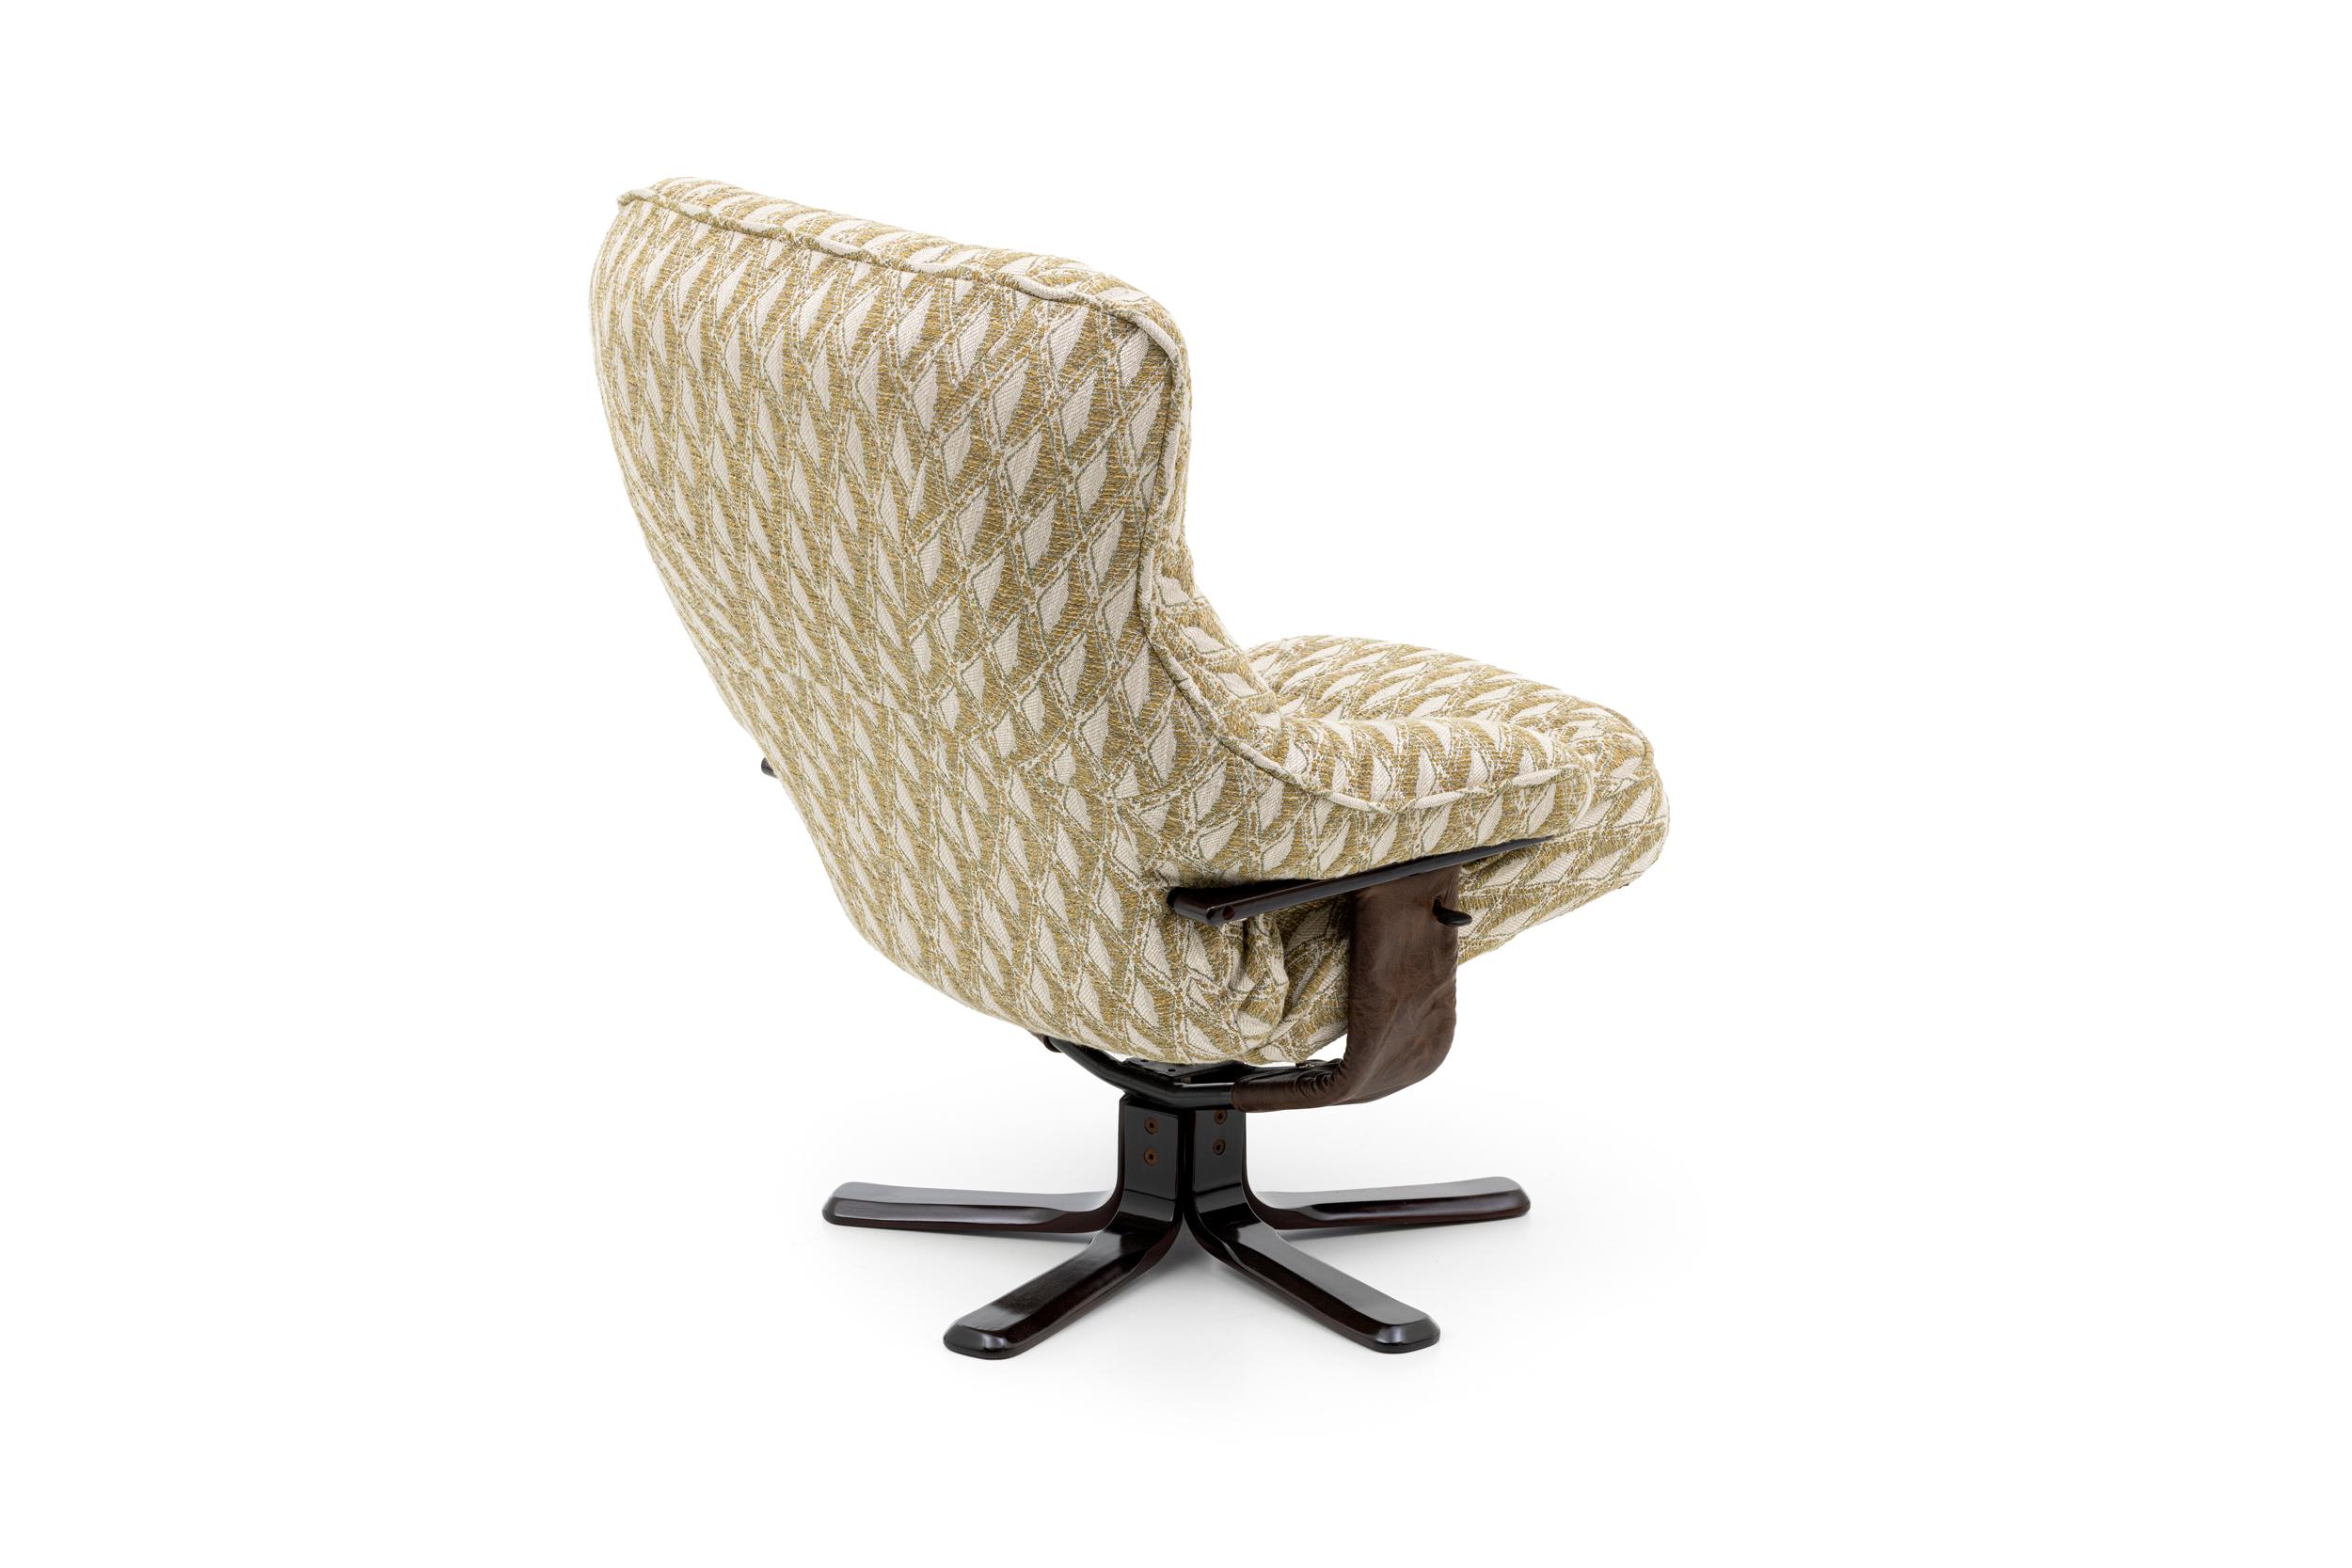 A robust vintage office chair, found by Ding Dong and re-upholstered in premium fabric.
A splendid office chair, with a Mid-Century Modern vibe.

The fabric:
At Ding Dong we prioritize using only high-end fabrics, which guarantees us quality and